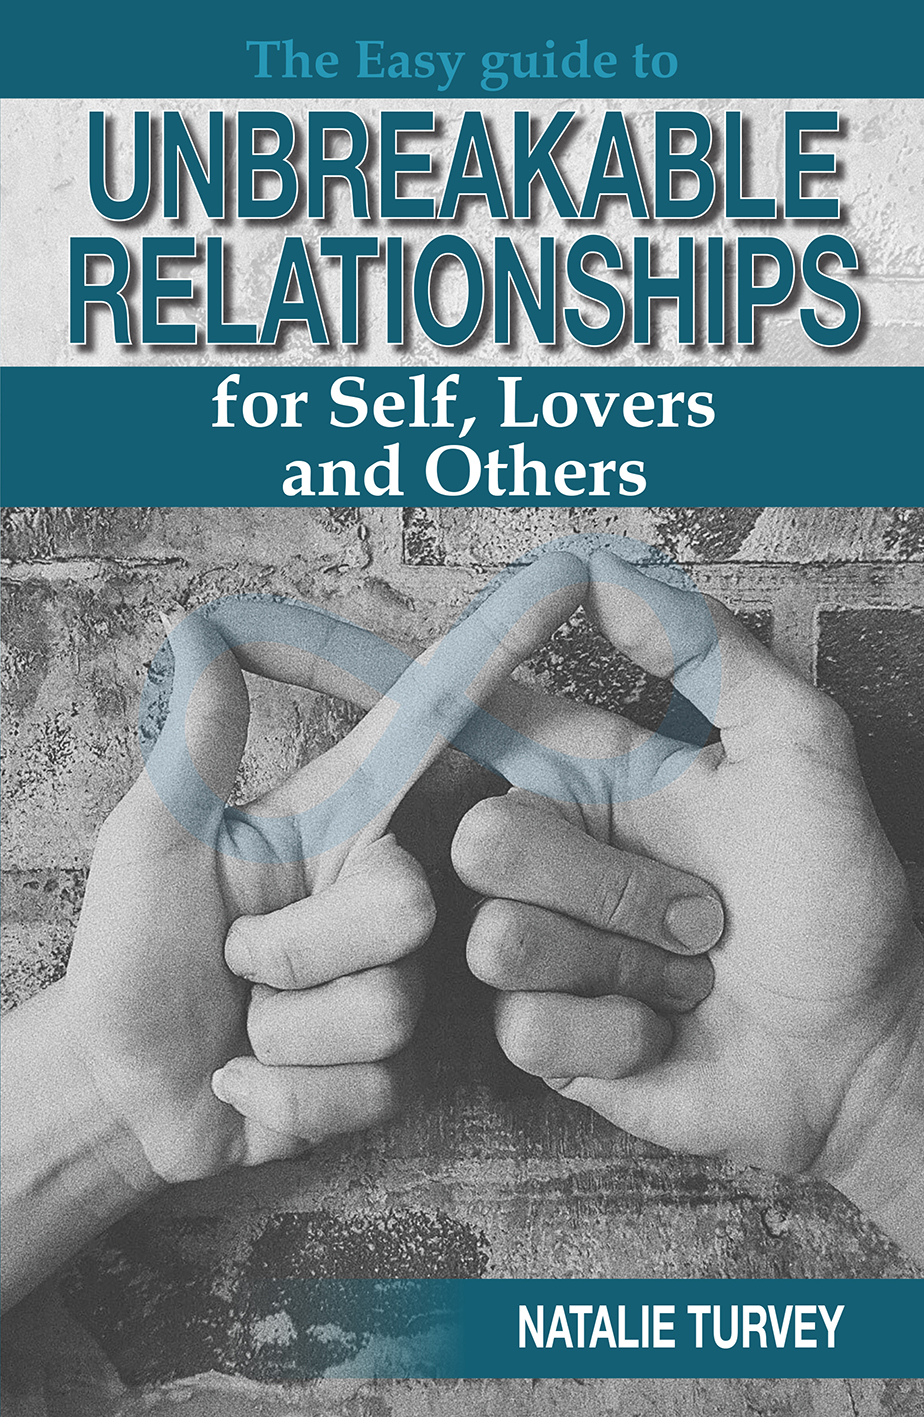 The Easy Guide to UNBREAKABLE RELATIONSHIPS